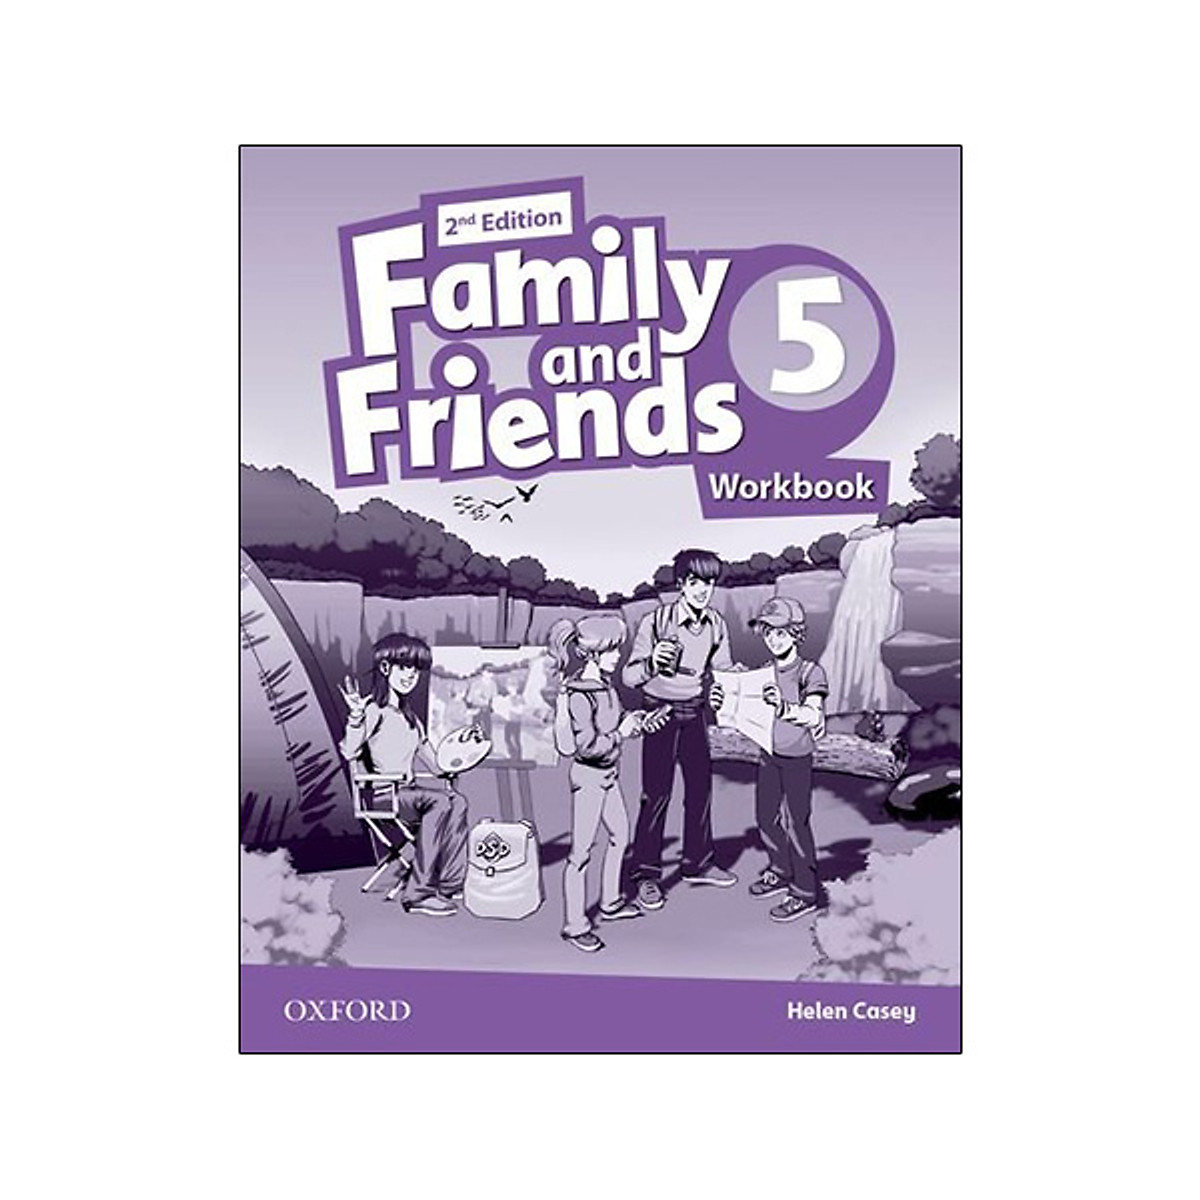 Workbook 5 2023. Family and friends 2 2nd Edition. Family and friends 2 Workbook фото. Family and friends 5. Oxford Family and friends 4 Workbook 2 ND 2.